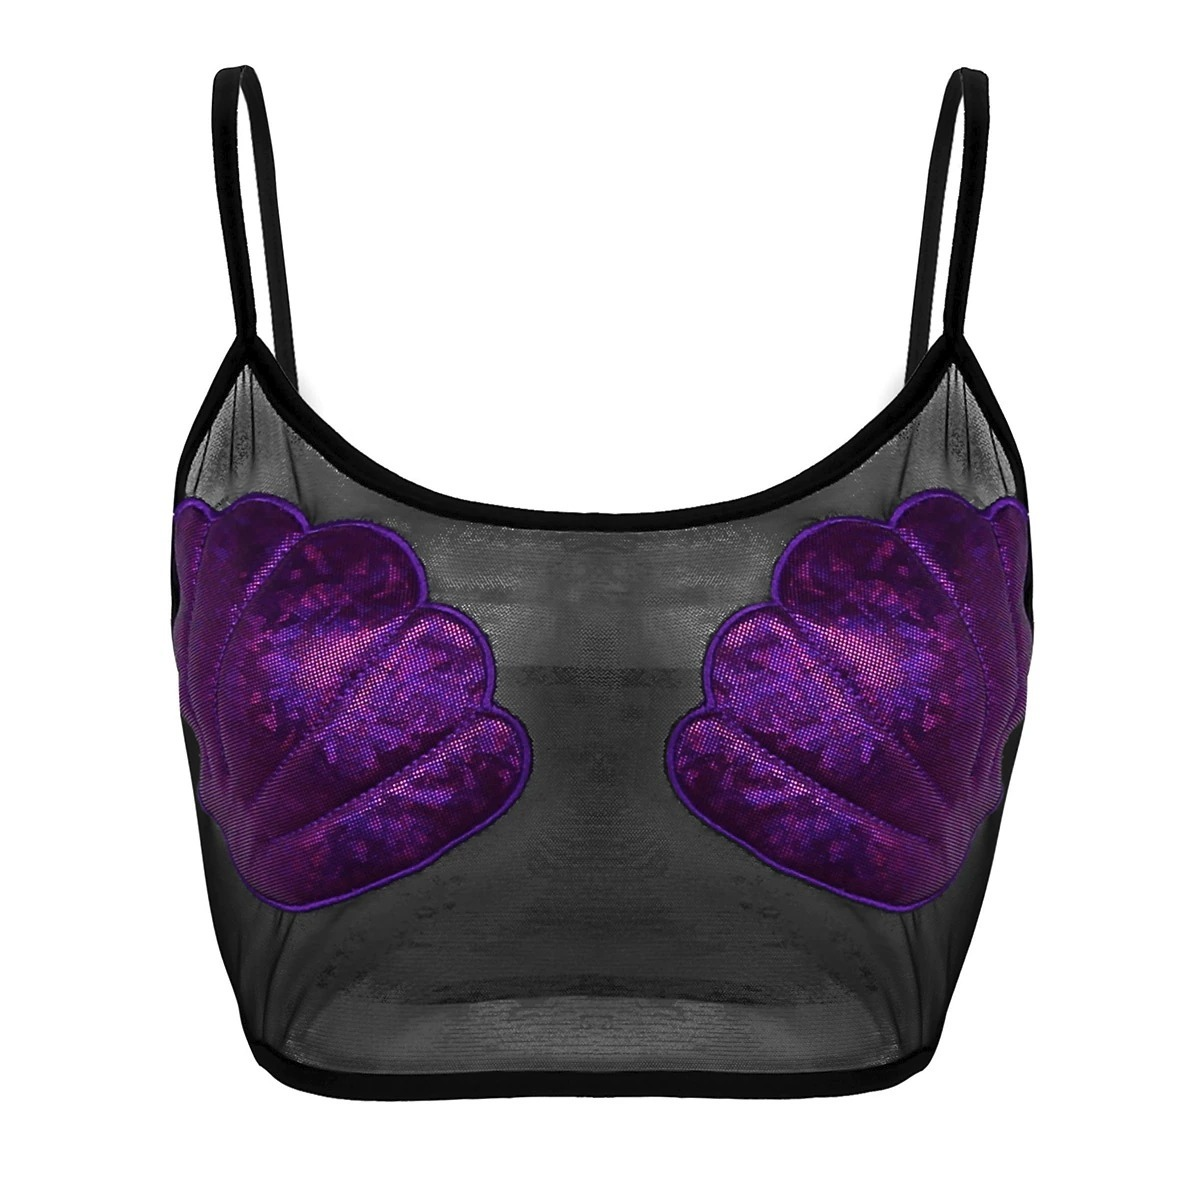 Sexy Women's Crop Top with Shiny Shell / Transparent Mesh Top for Ladies - EVE's SECRETS